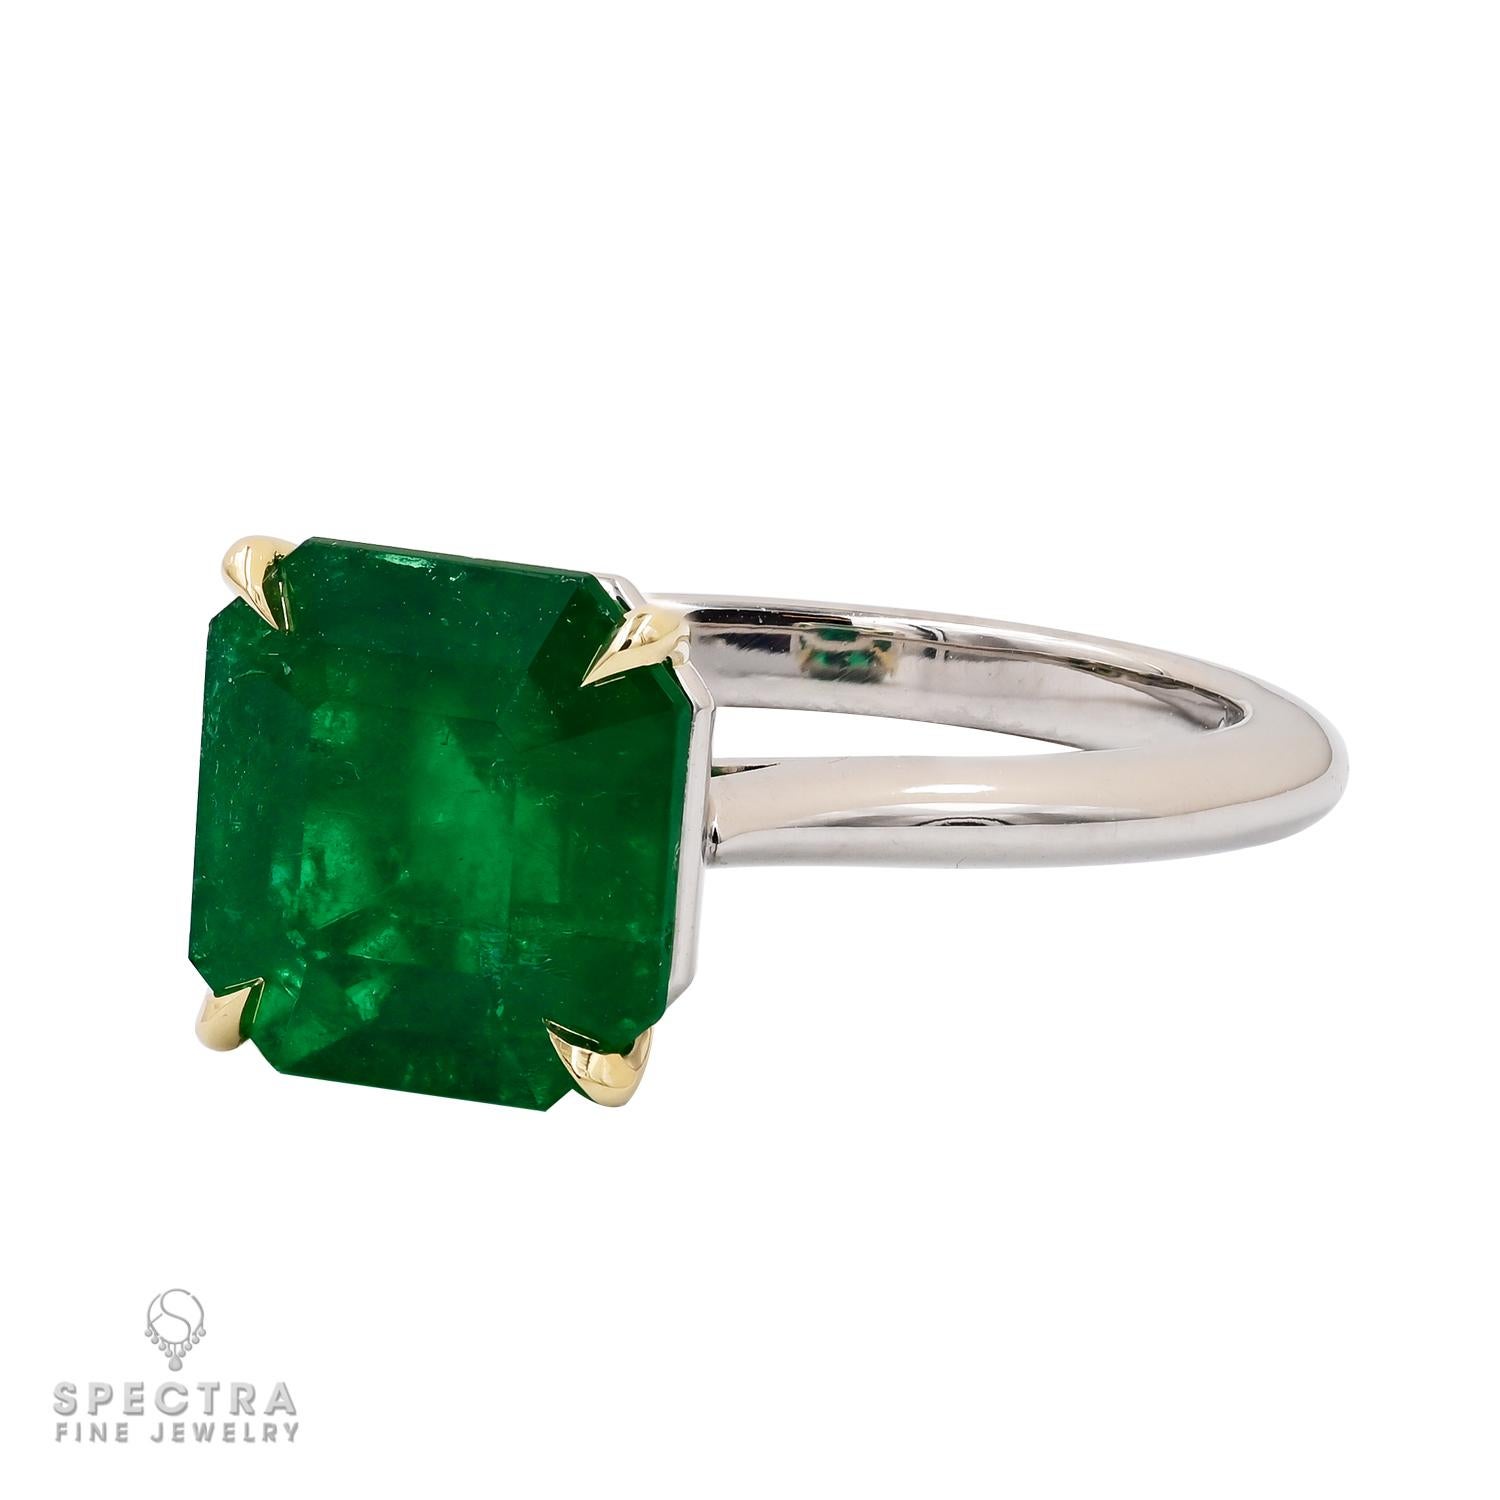 Indulge in the mesmerizing beauty of this stunning 3.48-carat Colombian Emerald Cocktail/Engagement Ring. Certified by GRS to be of Colombian origin with minor clarity enhancement, this exquisite emerald displays the coveted Muzo green hue, renowned